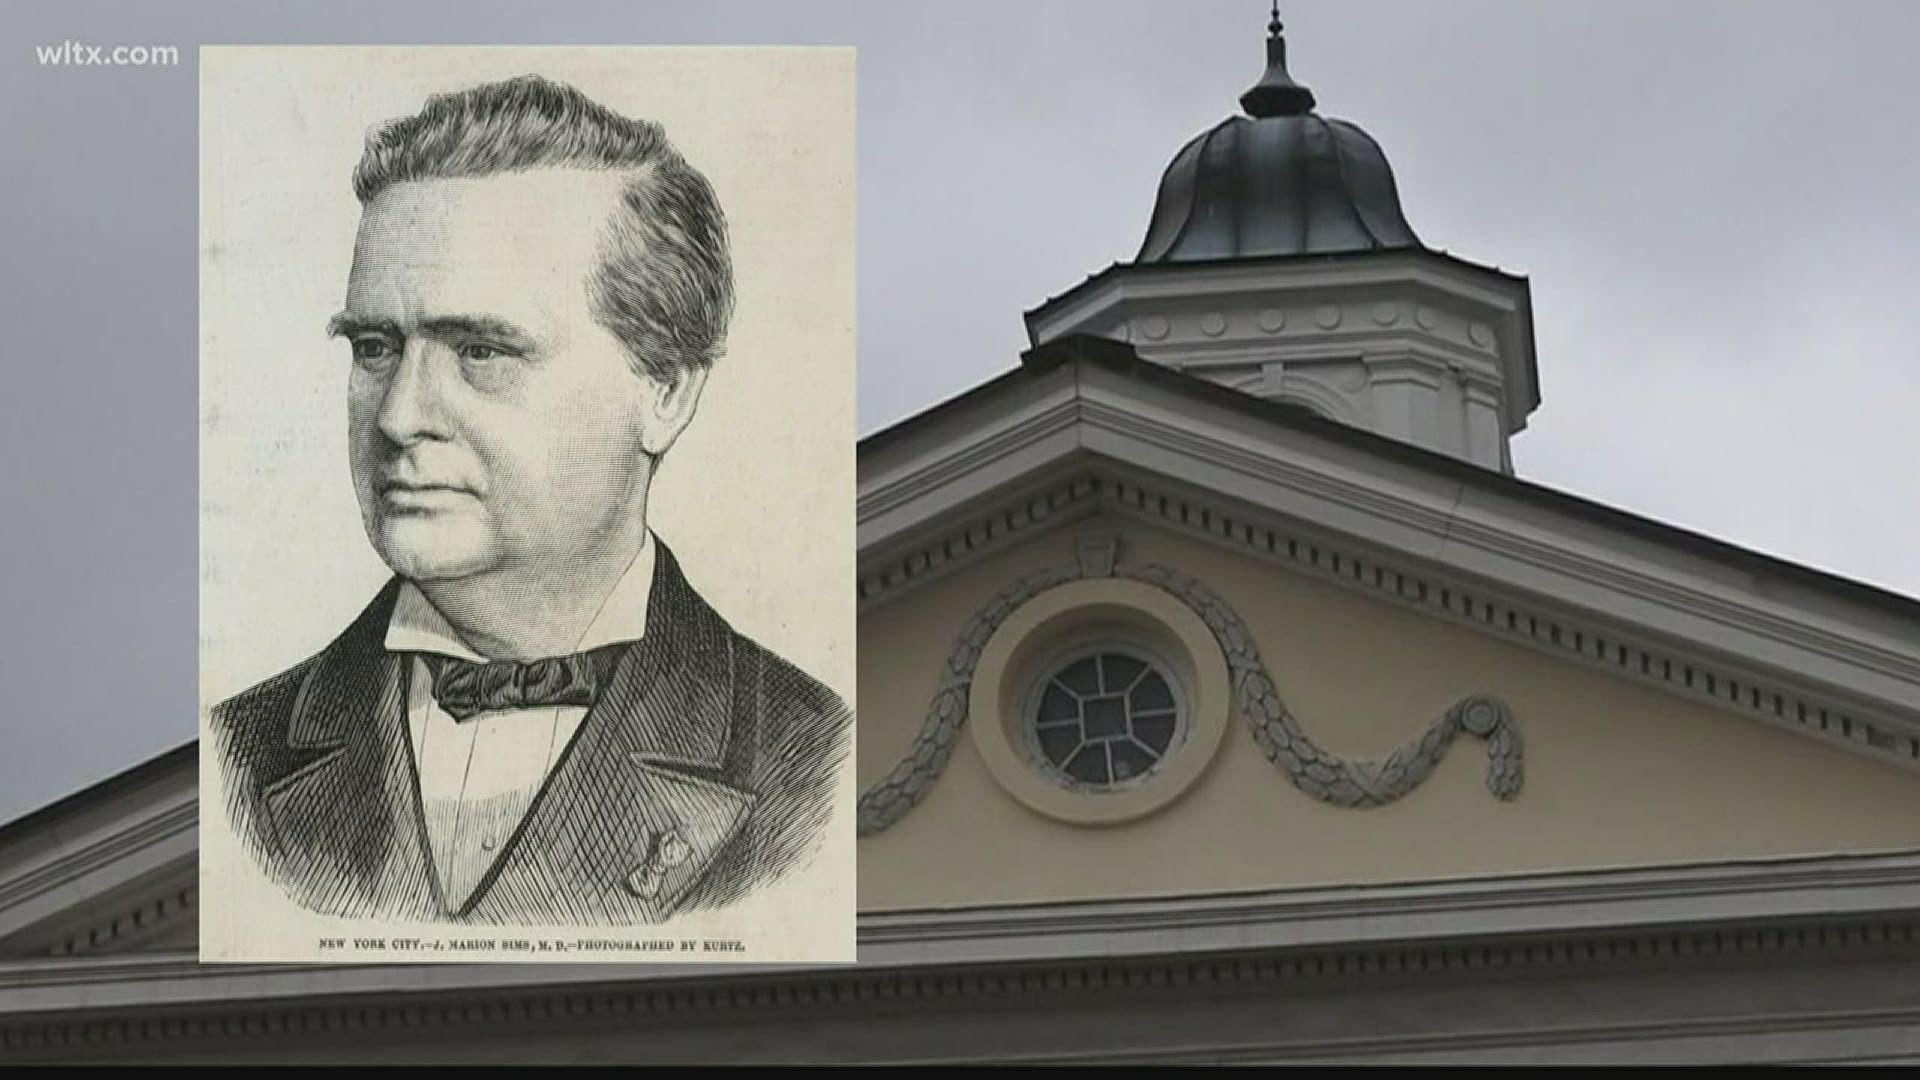 The building honors J. Marion Sims, an American physician known as the "father of modern gynecology" who performed experiments on slaves.